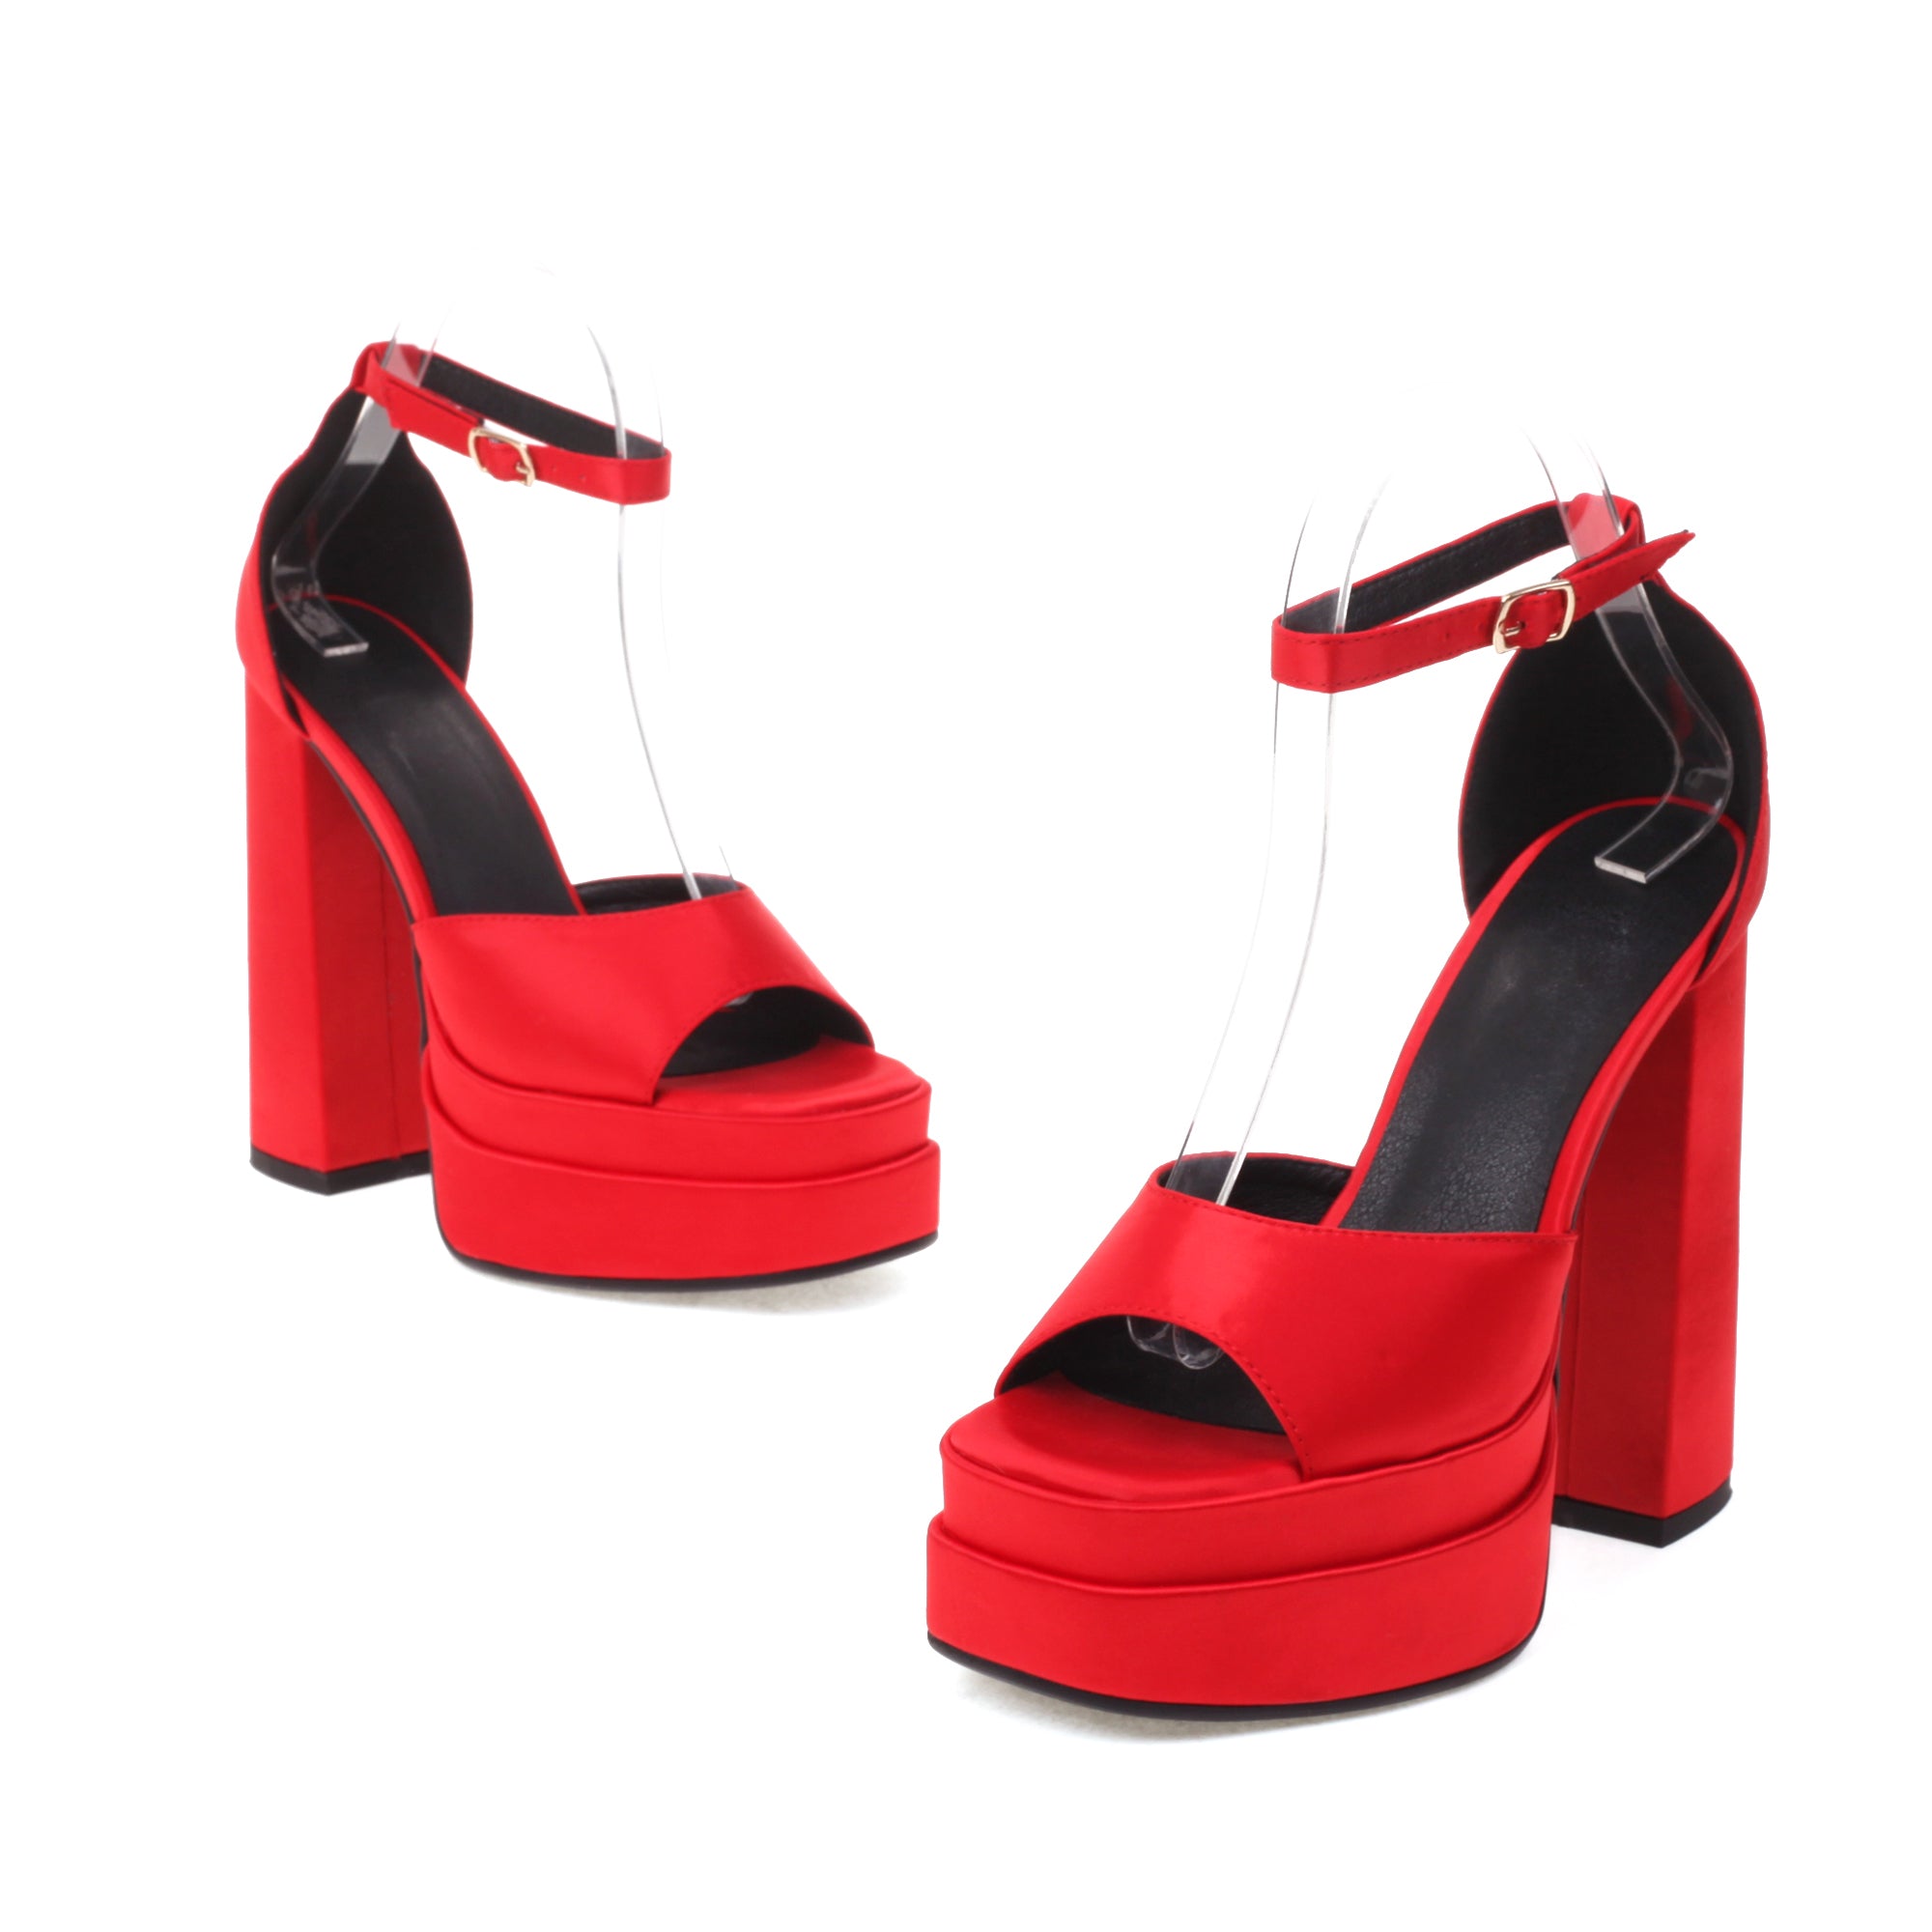 the Sexy Platform Ankle Strap Open Toe Sandals-Red are from bigsizeheels